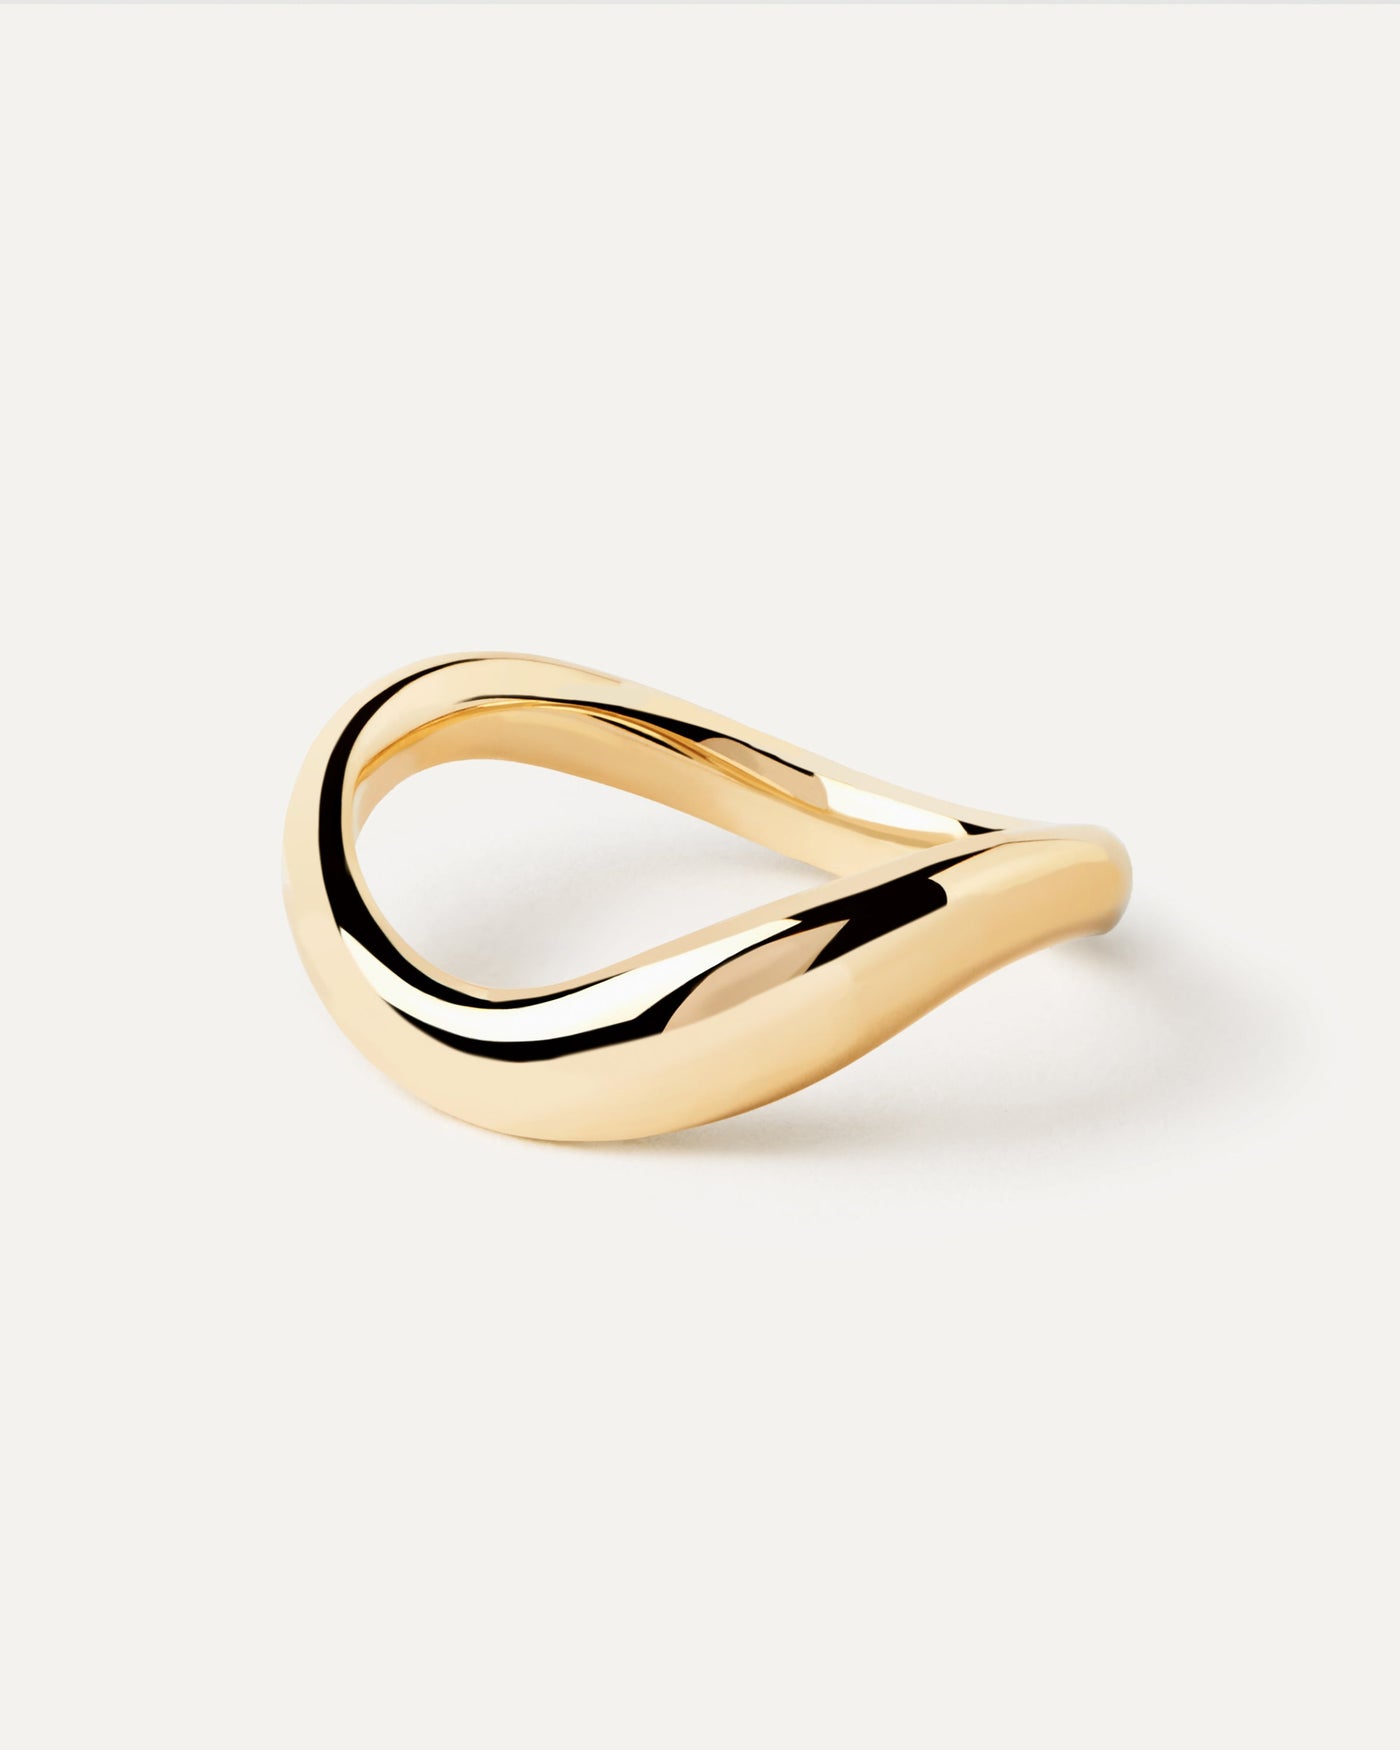 2023 Selection | Gold Celeste Ring. Anillo ondulado de oro amarillo macizo con grabado PDPAOLA. Get the latest arrival from PDPAOLA. Place your order safely and get this Best Seller. Free Shipping.